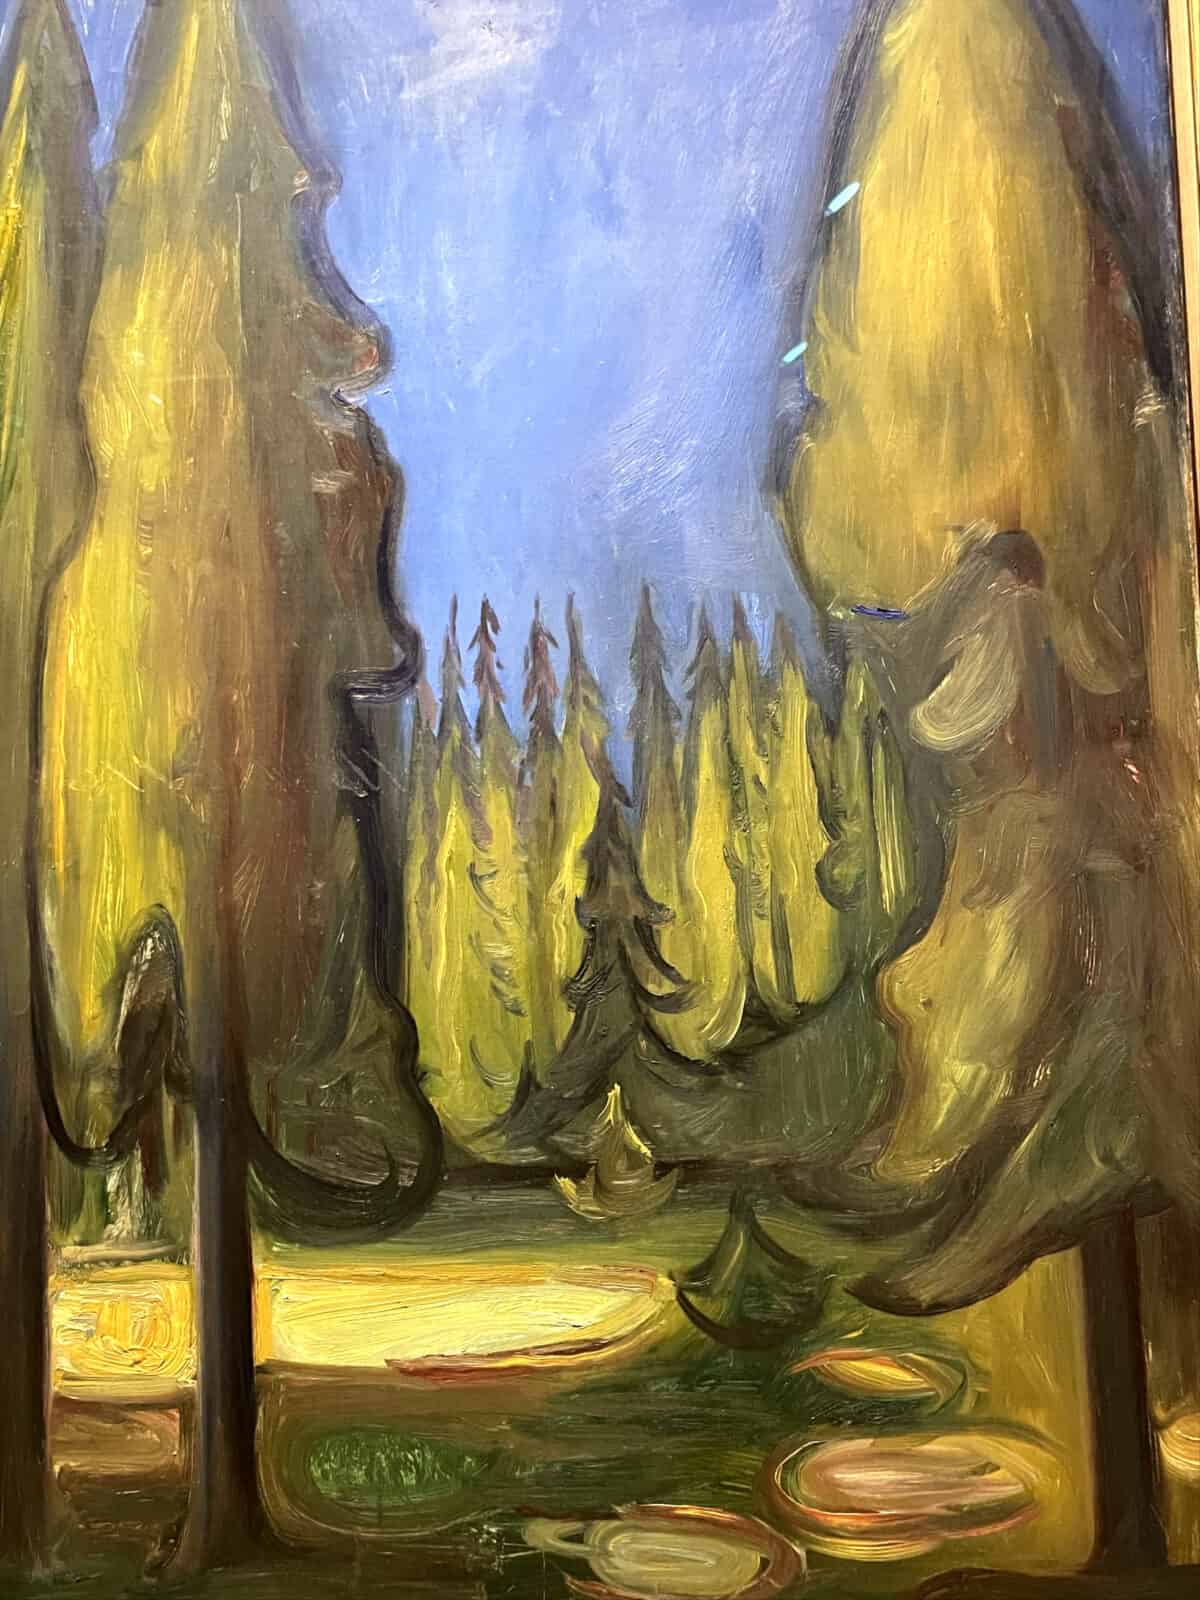 Edvard Munch's Dark Spruce Forest (1899) shows trees tall and glimmering in the dusk. Press photo courtesy of the Clark Art Institute